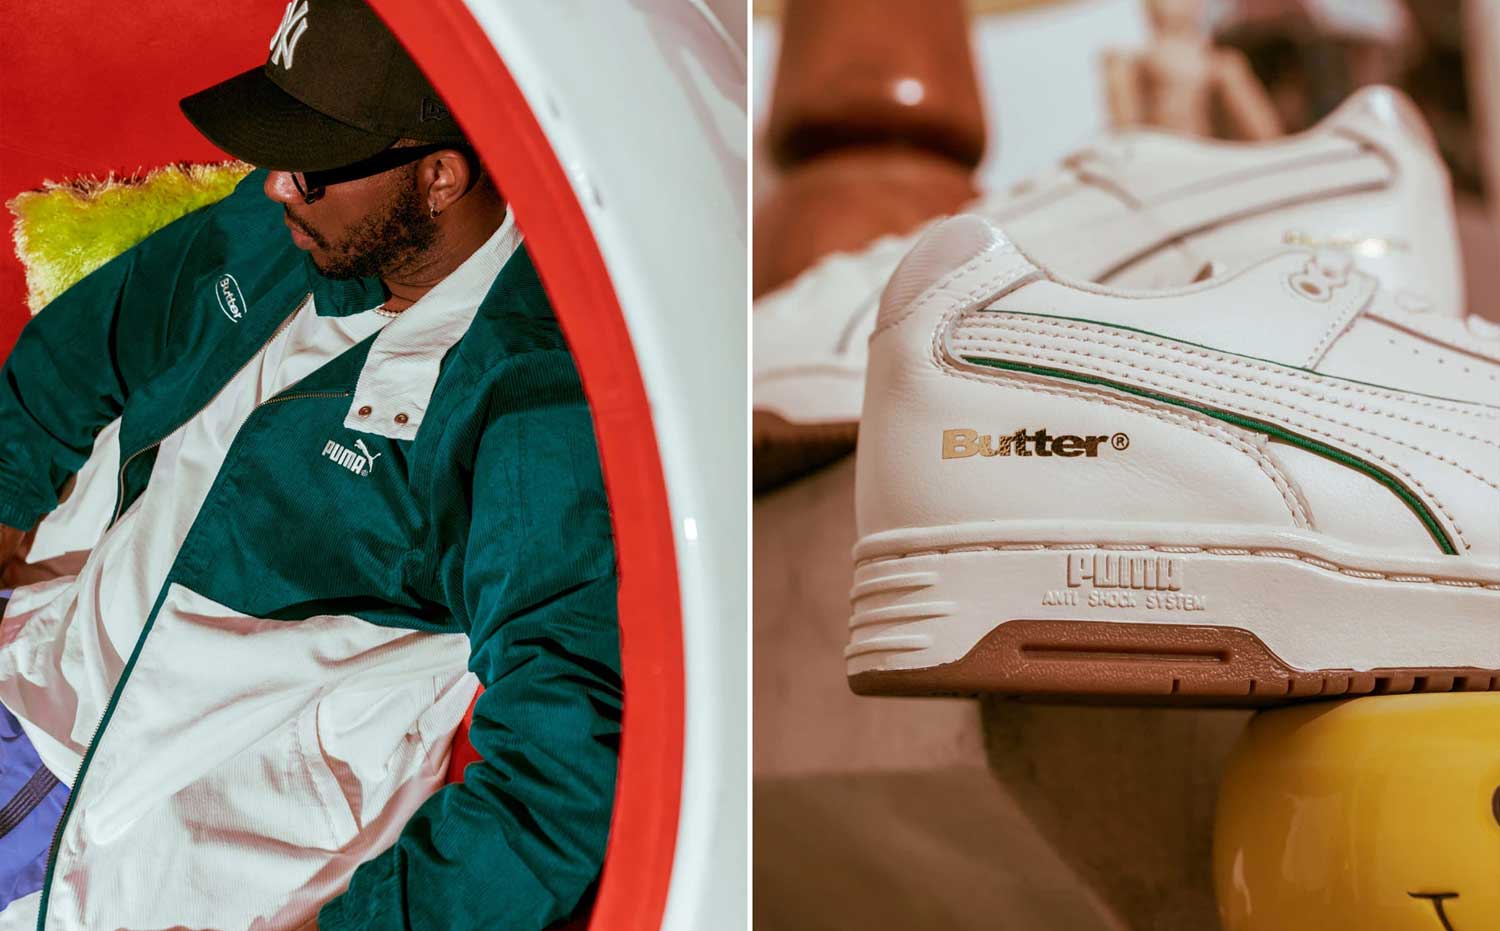 Butter Goods x Puma Clothing & Footwear available at Fallenfront NZ